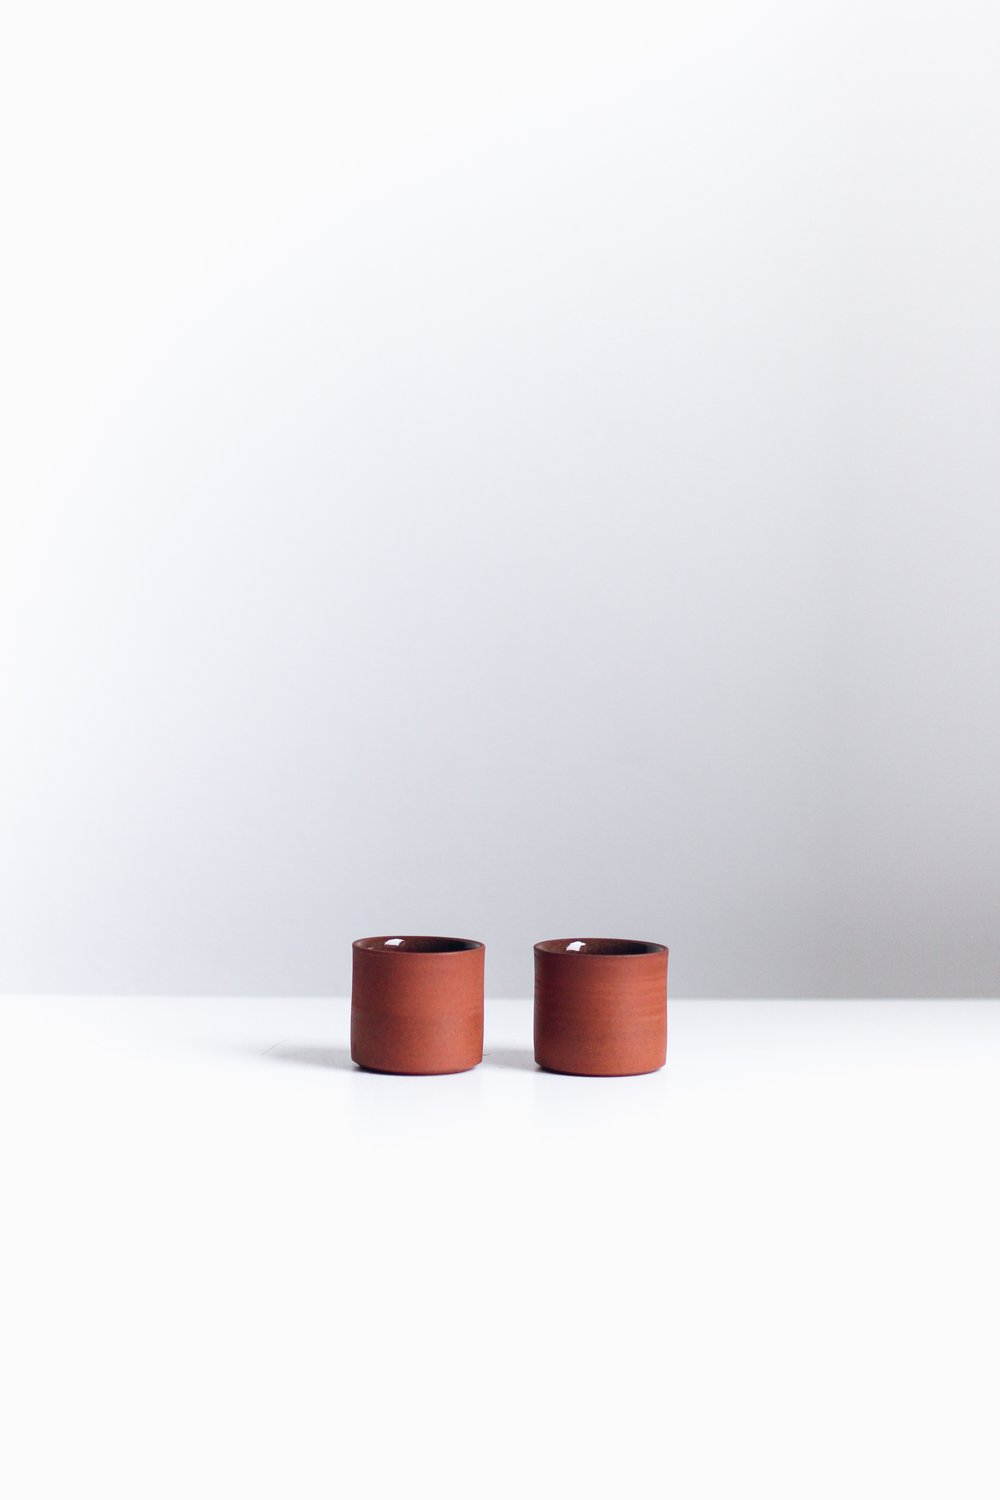 Image of Two Espresso / Mezcal Cups